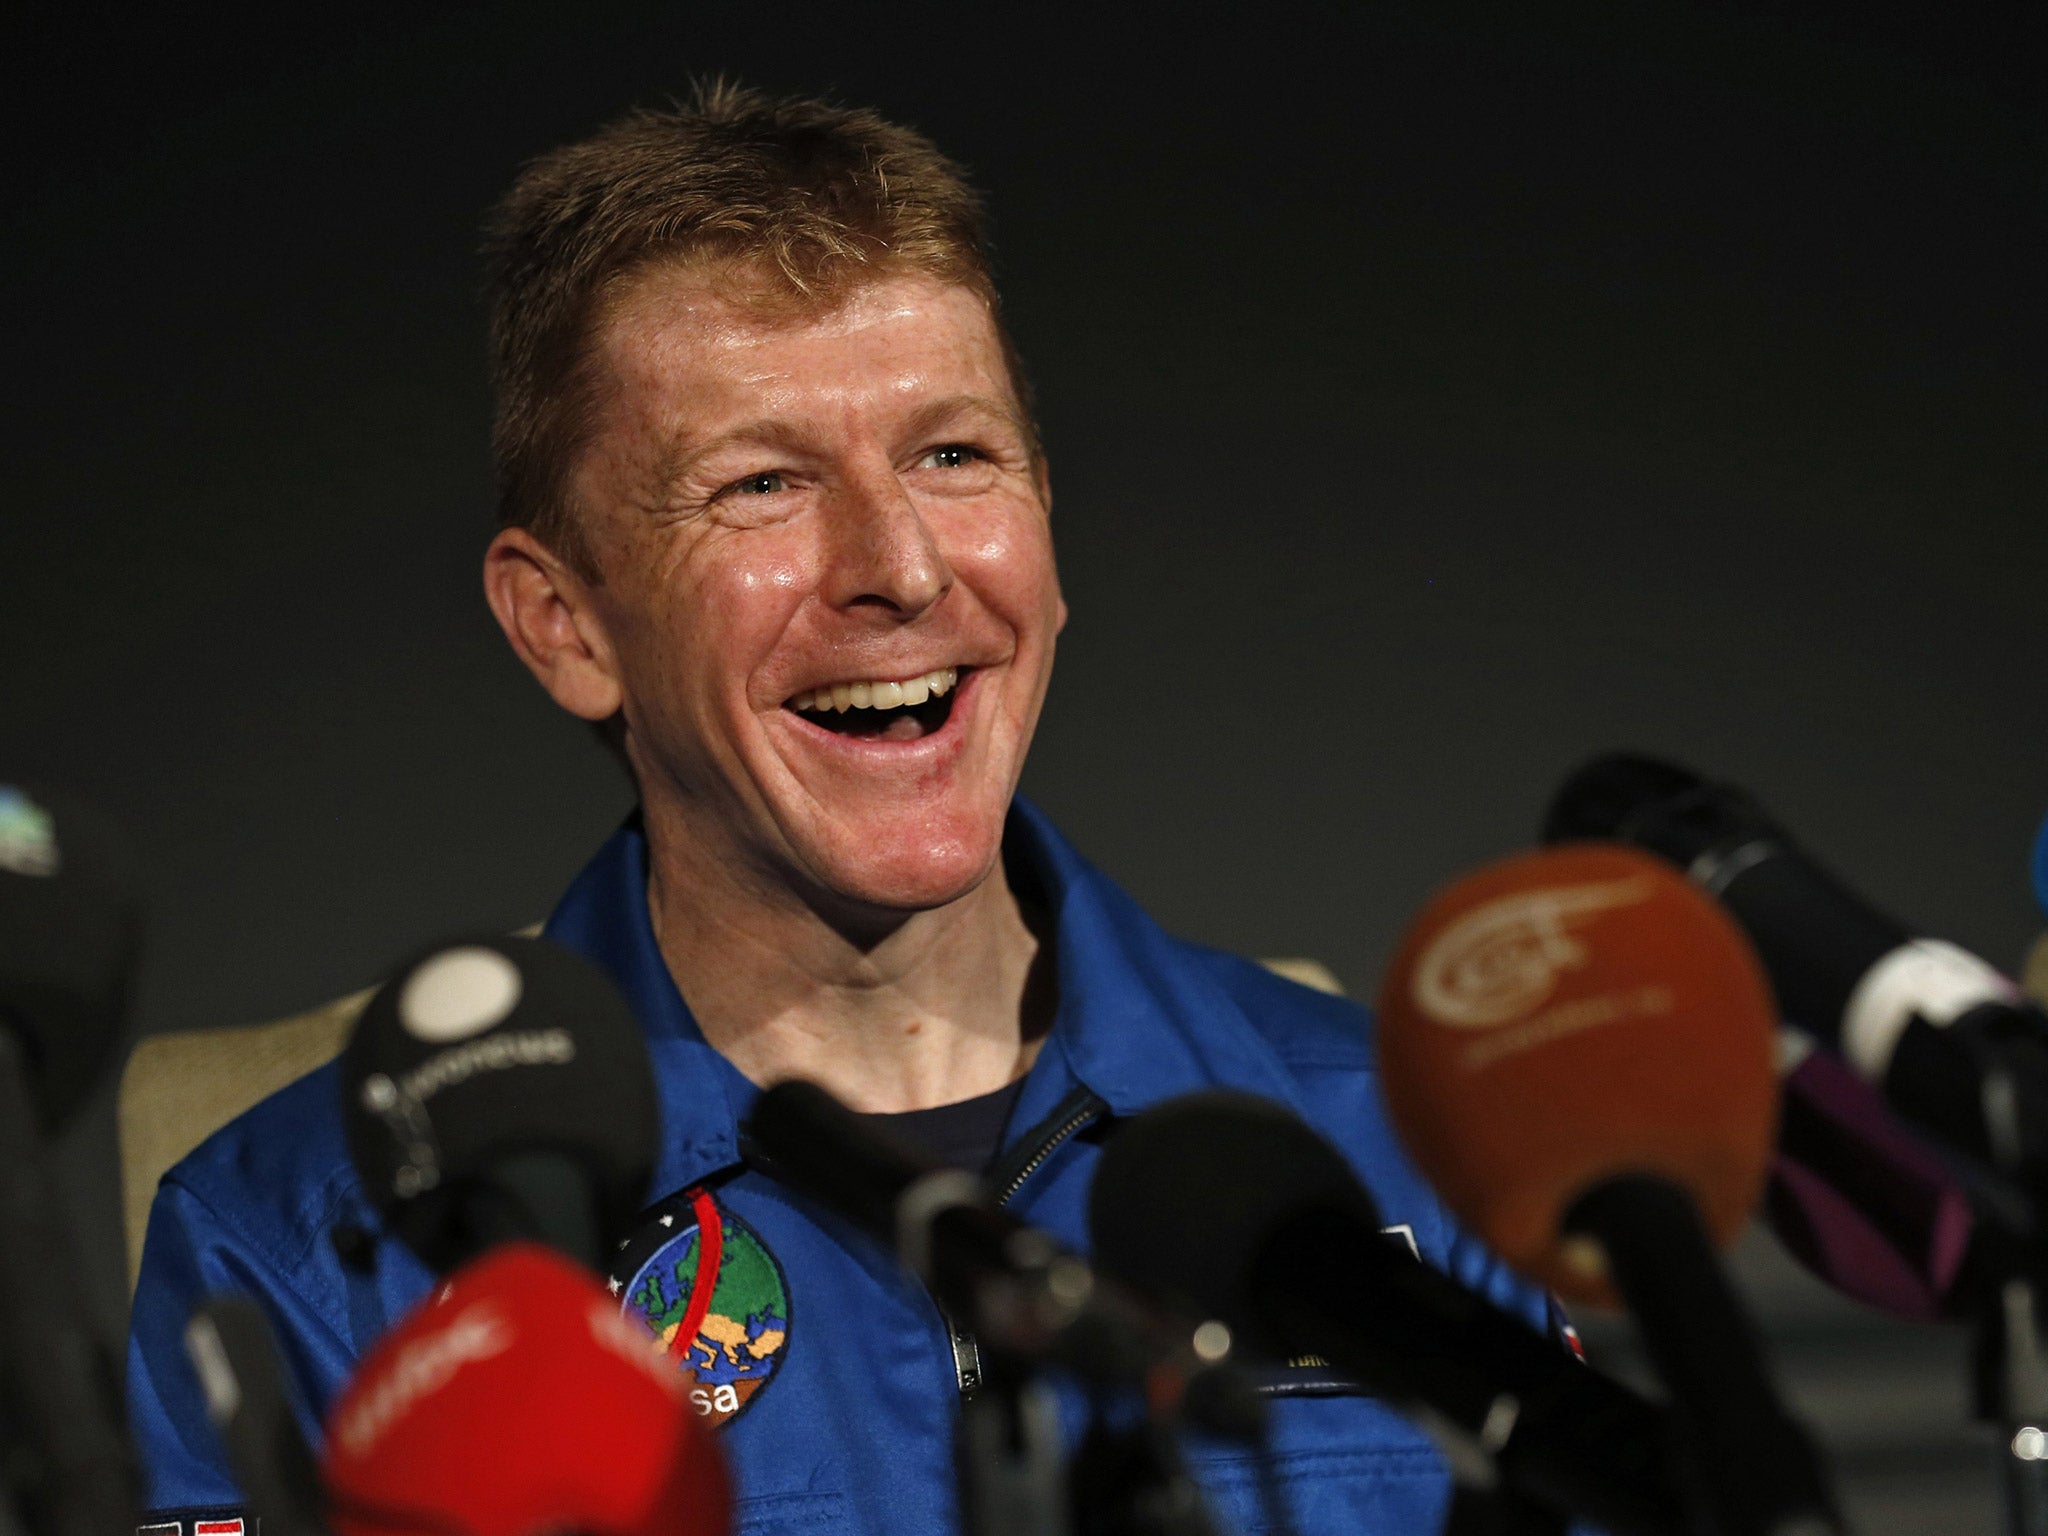 British astronaut Major Tim Peake who is to become the first UK astronaut in space for over 20 years.